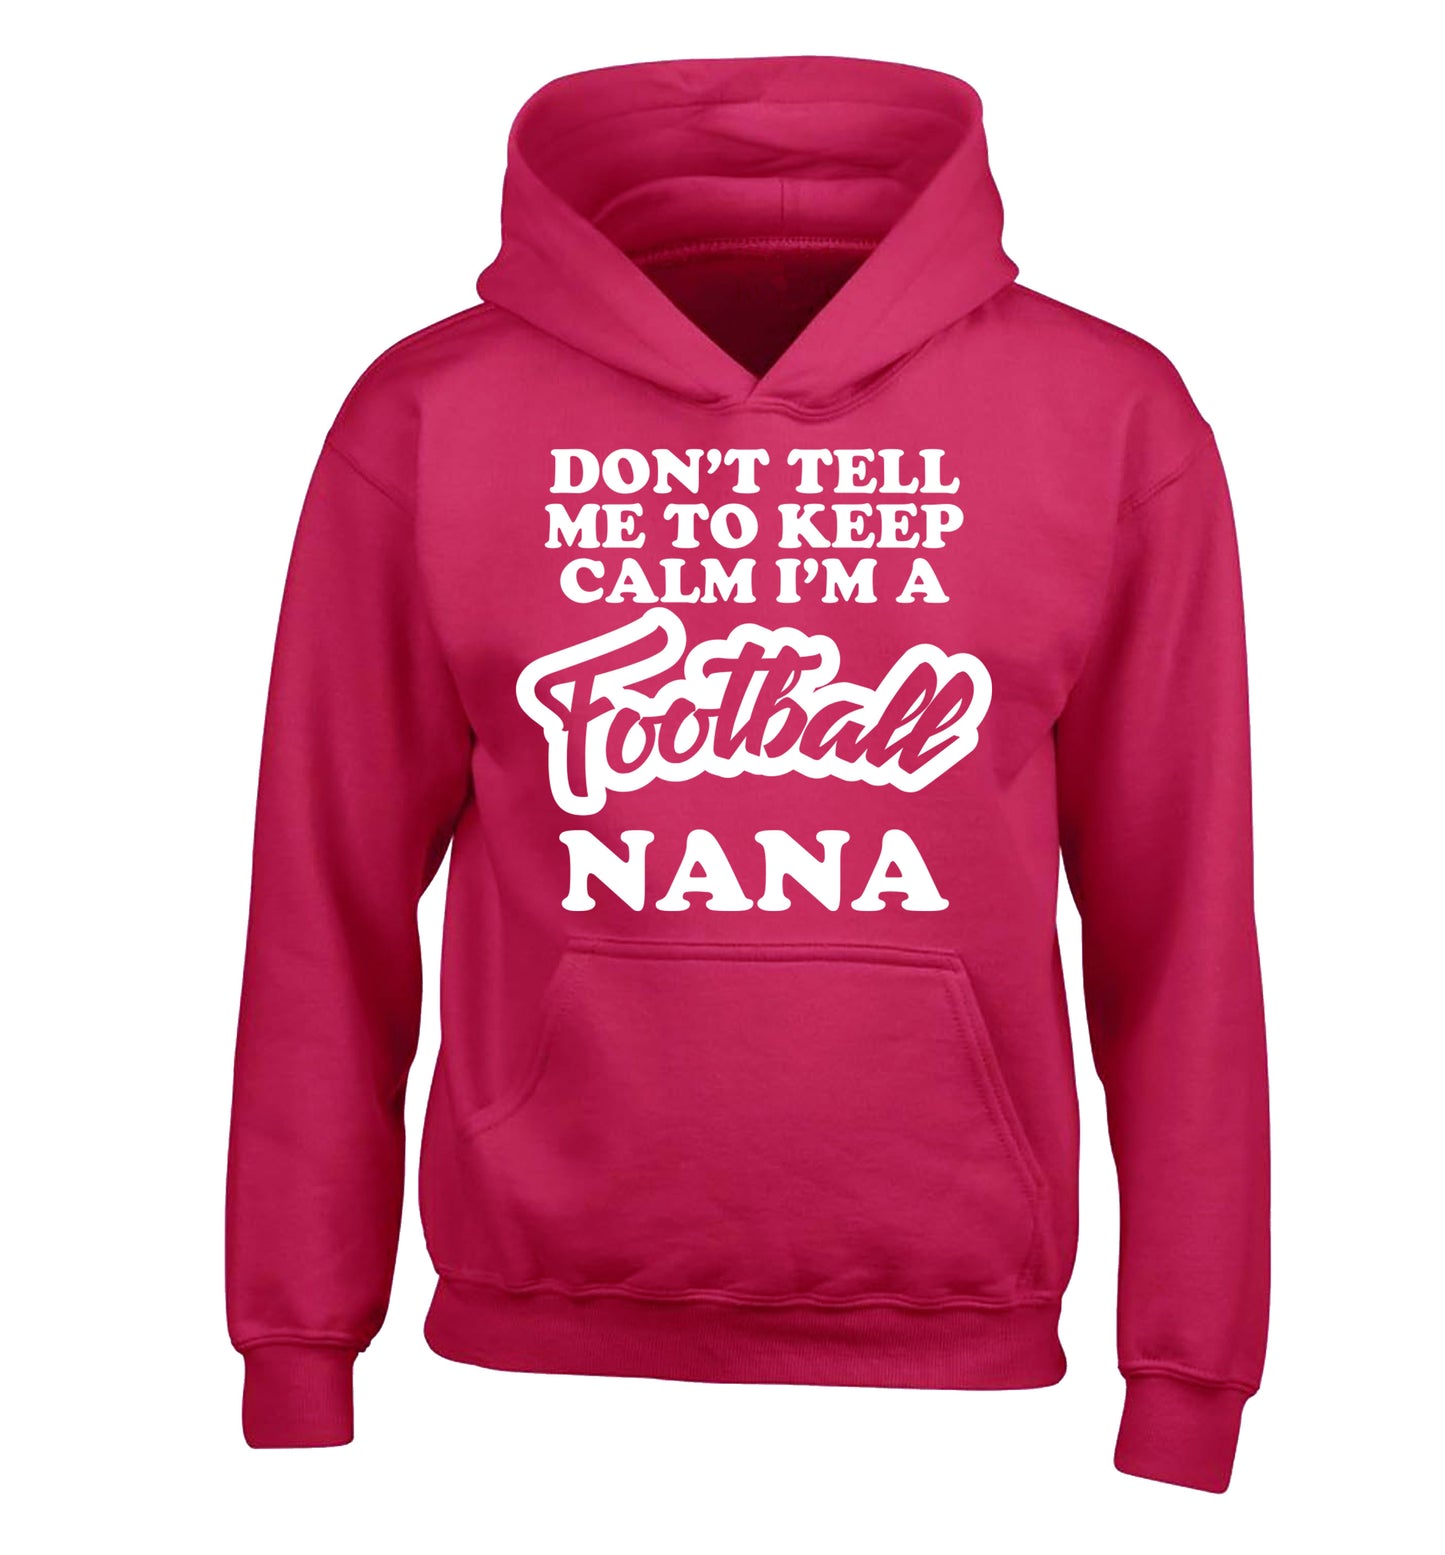 Don't tell me to keep calm I'm a football nana children's pink hoodie 12-14 Years